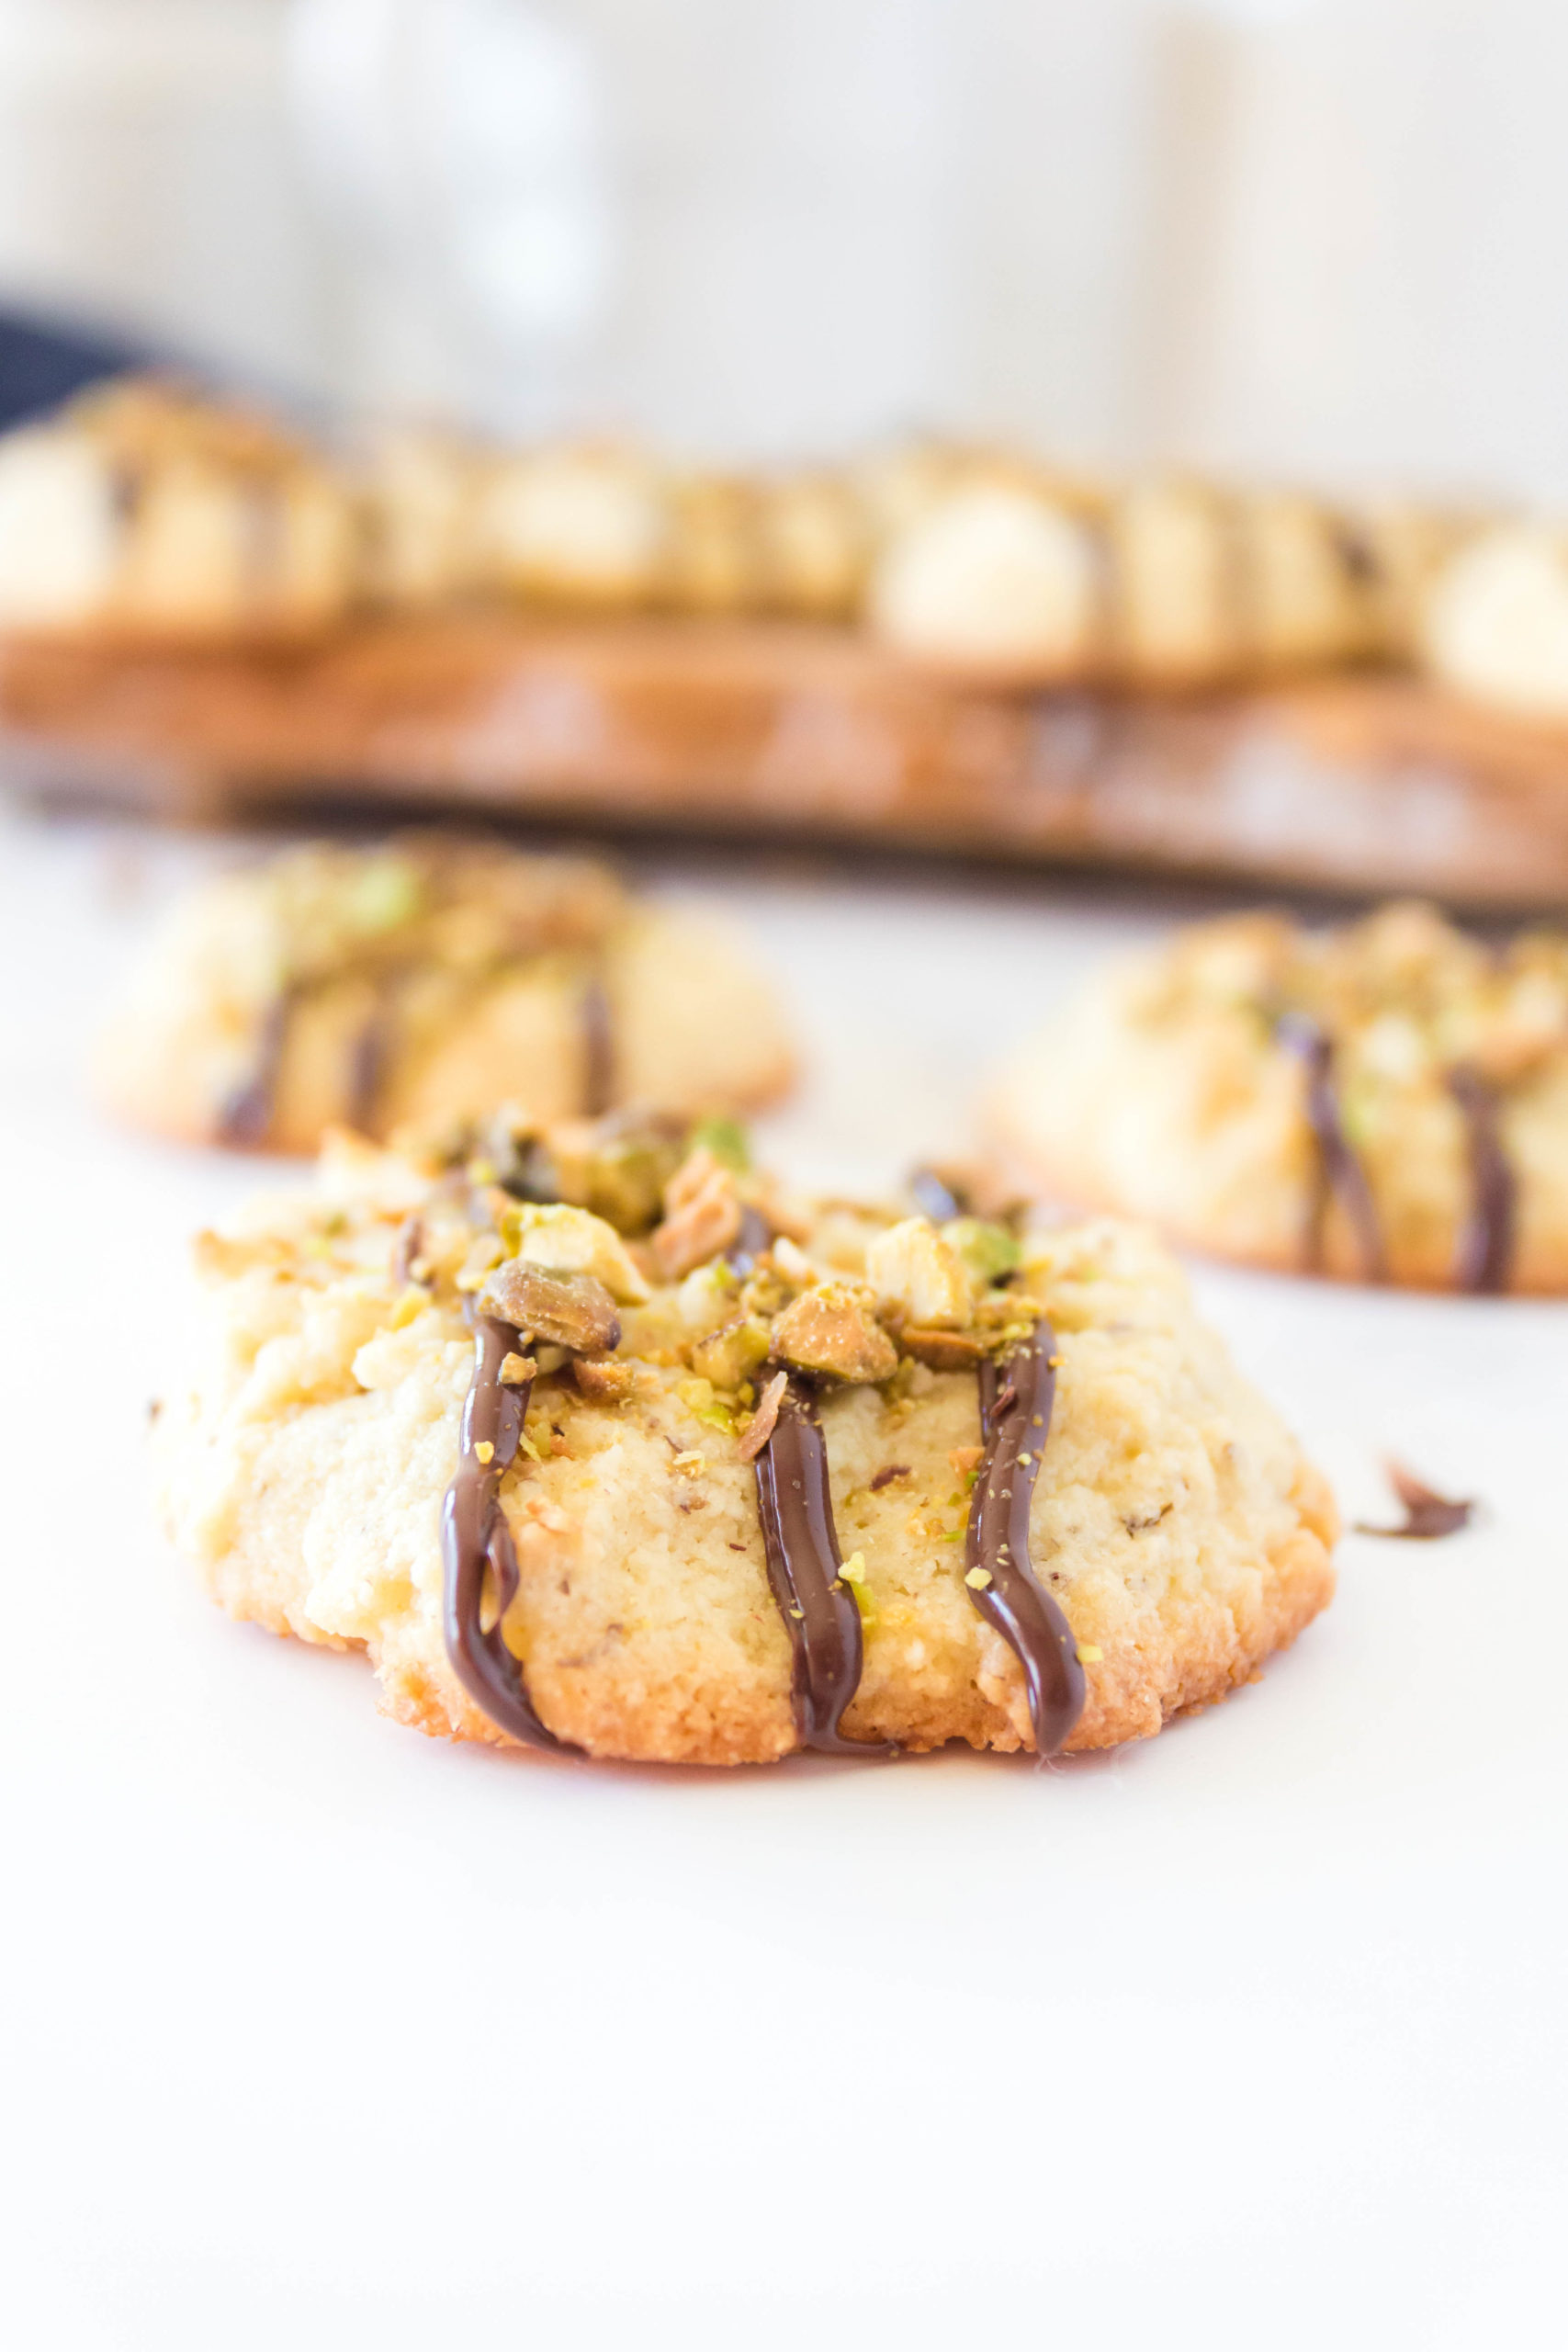 One keto butter cookie with drizzled chocolate and chopped pistachios in top with others in the background.